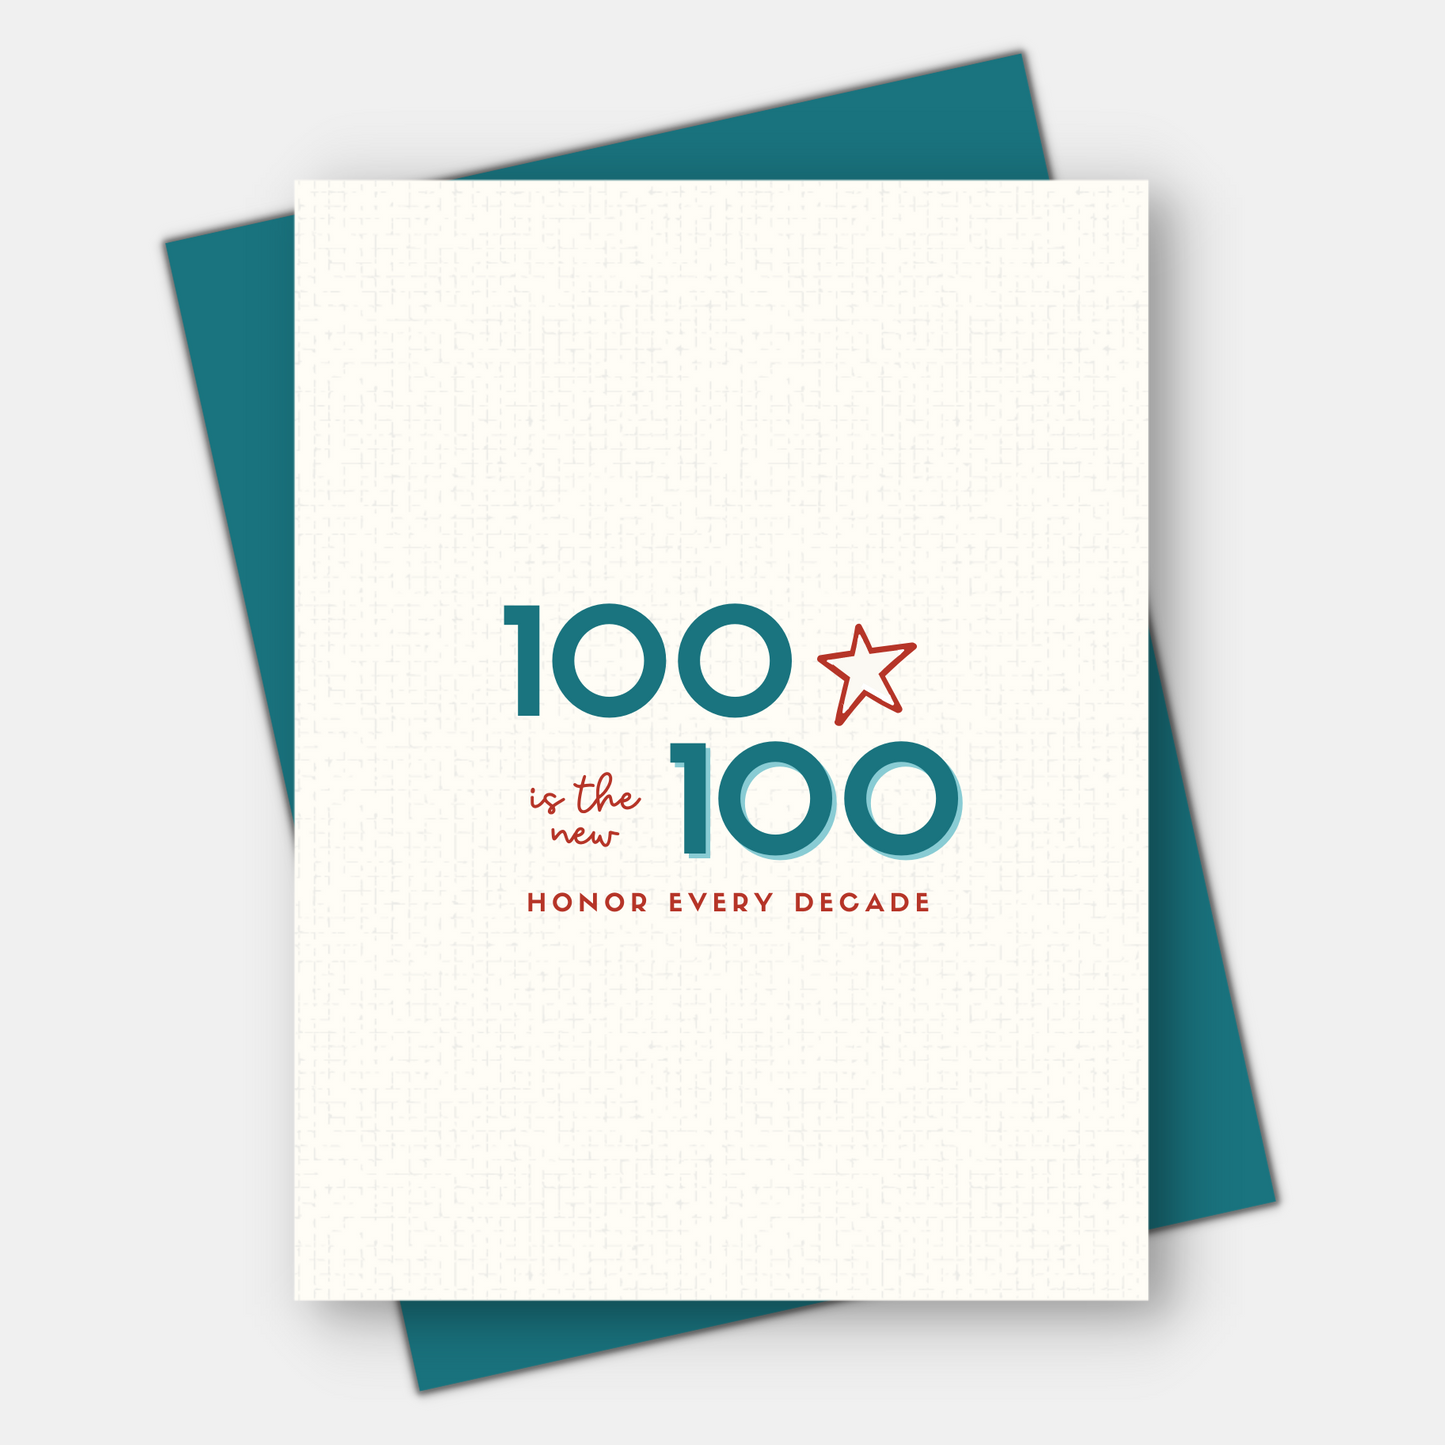 70 is the new 70, milestone birthday card for 50-100 decades